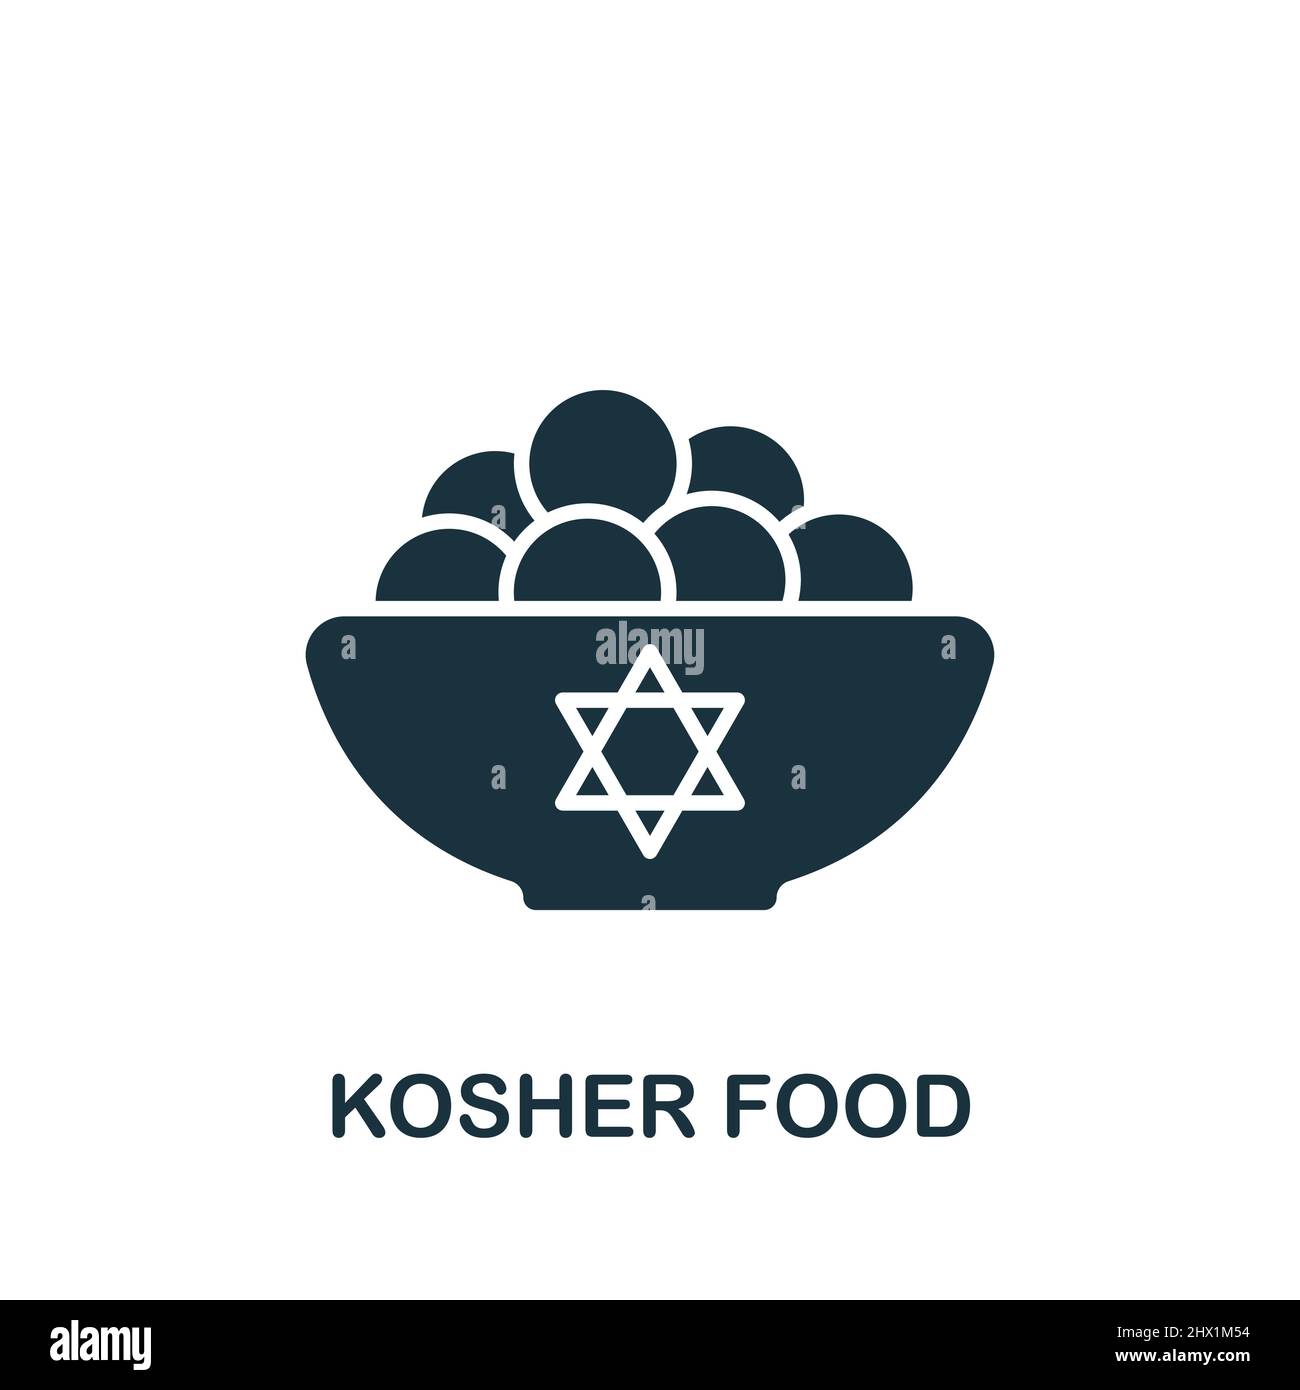 Kosher Food icon. Monochrome simple icon for templates, web design and infographics Stock Vector